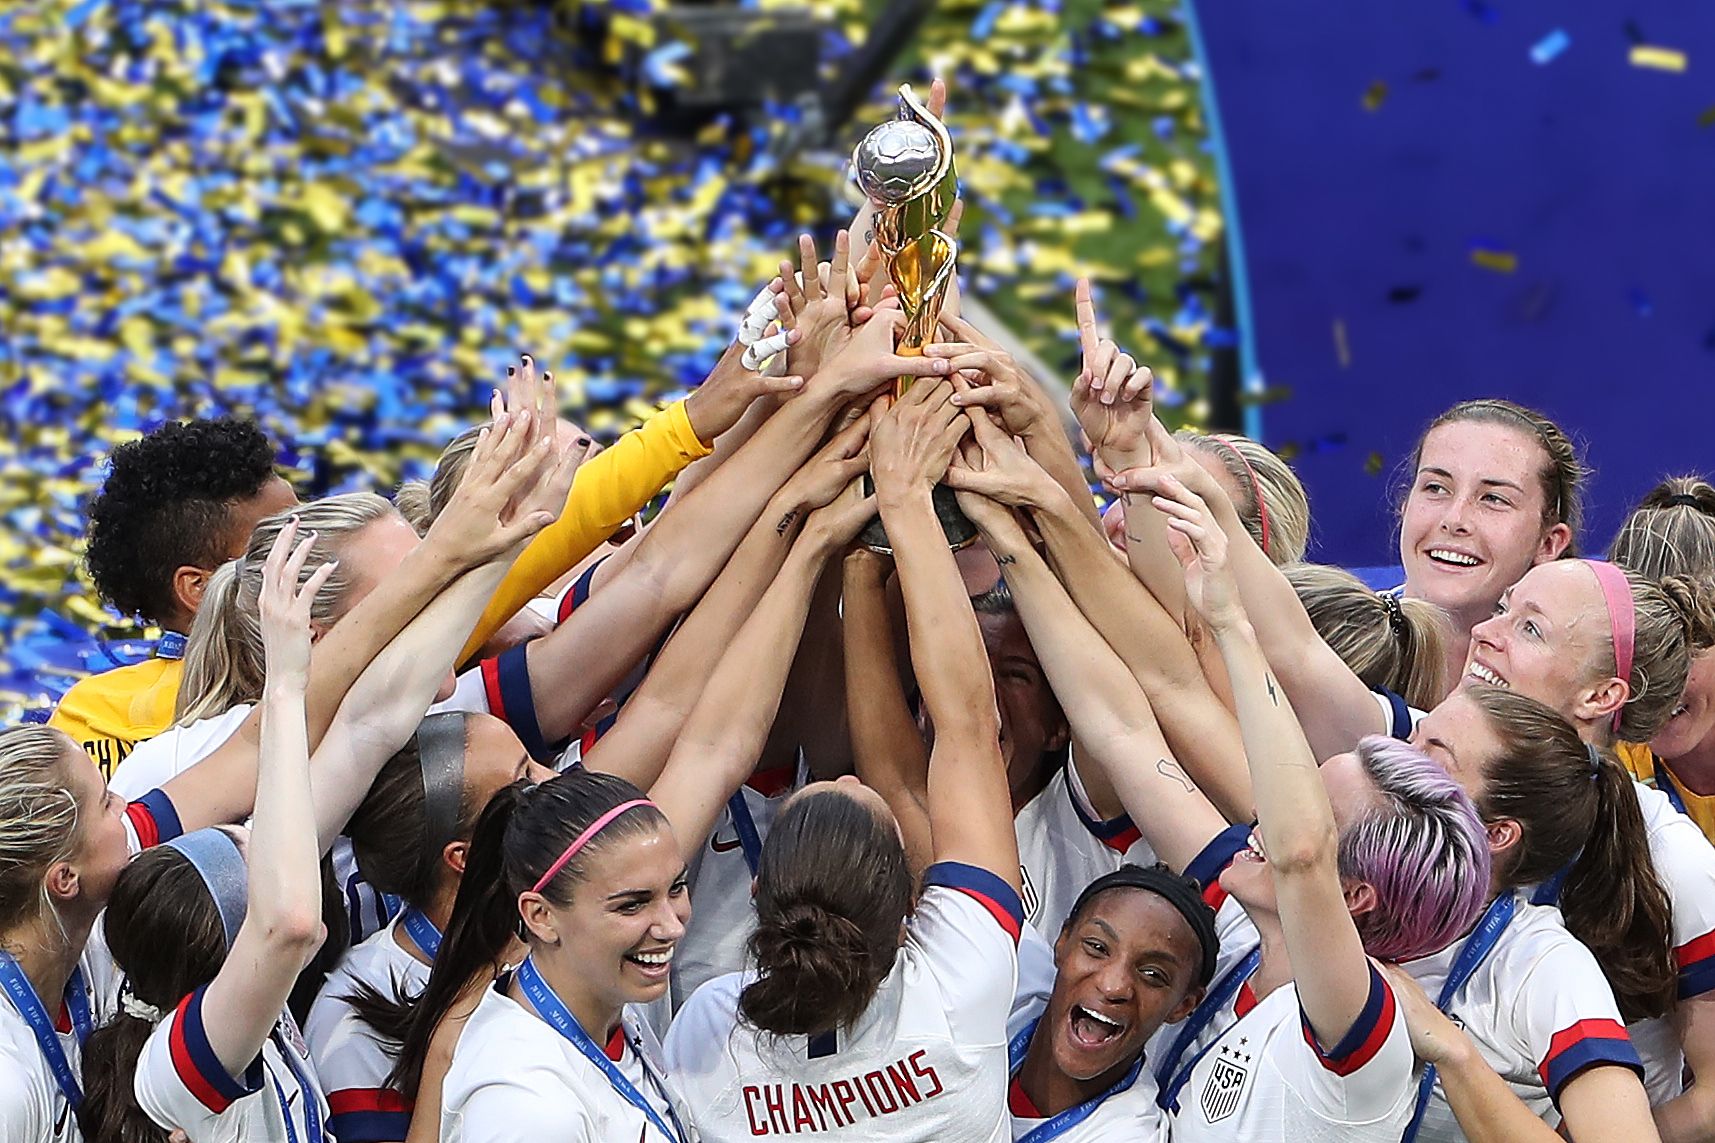 USA celebrate winning their 4th World Cup title with the trophy during the 2019 FIFA Women's World Cup France Final match.